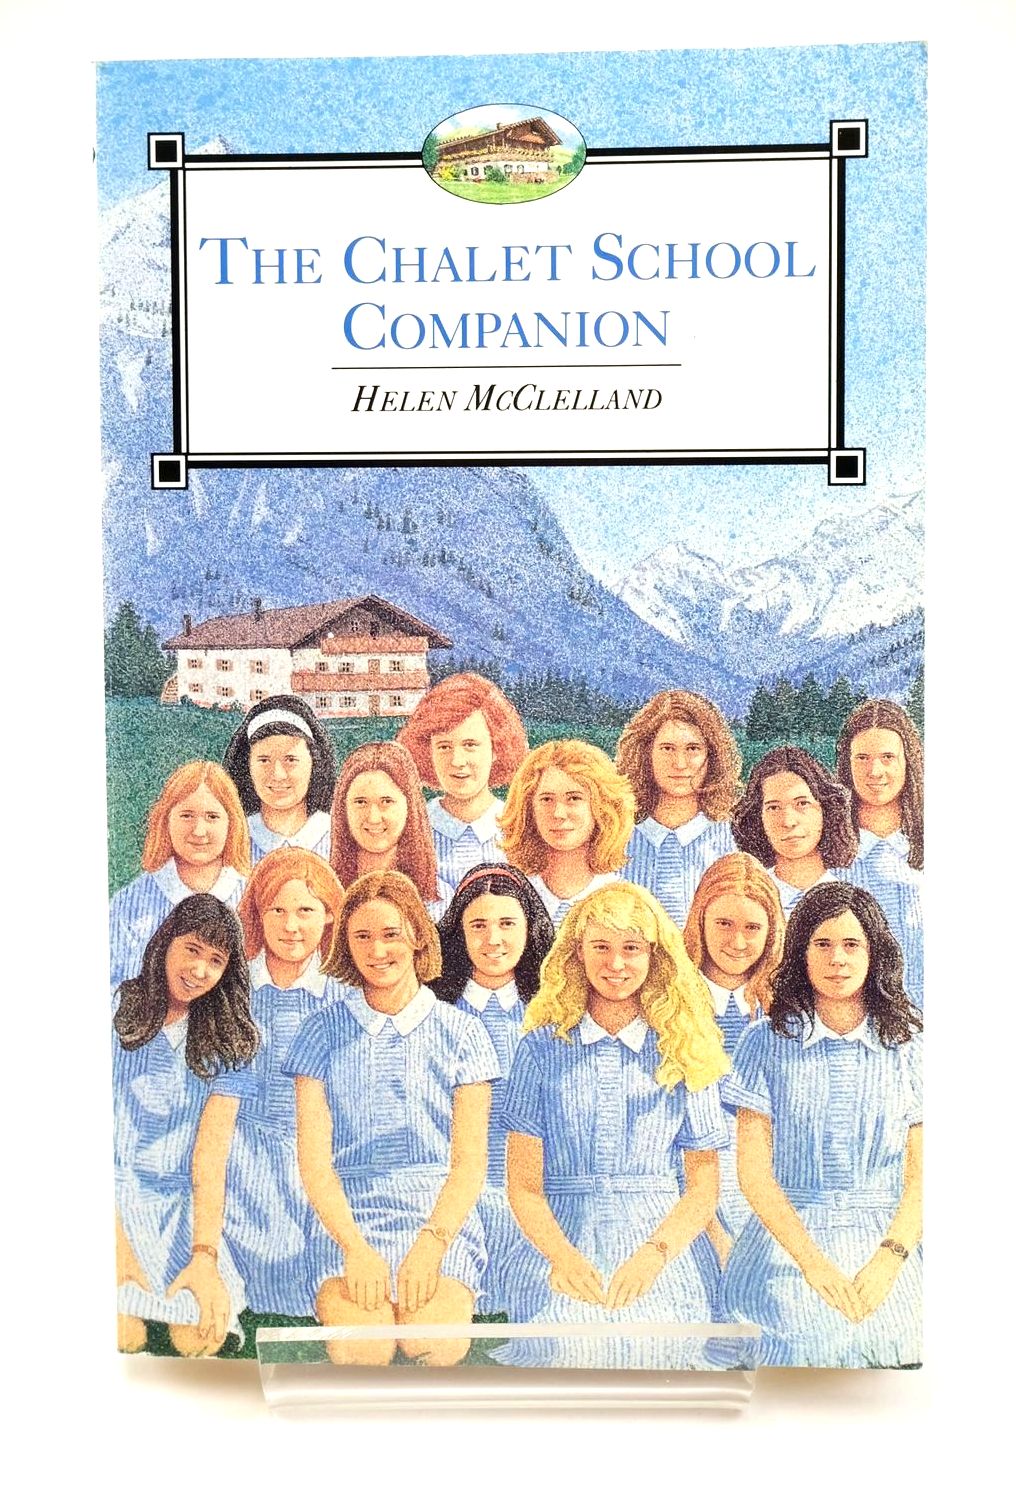 Photo of THE CHALET SCHOOL COMPANION written by Brent-Dyer, Elinor M. McClelland, Helen published by Armada (STOCK CODE: 1319330)  for sale by Stella & Rose's Books